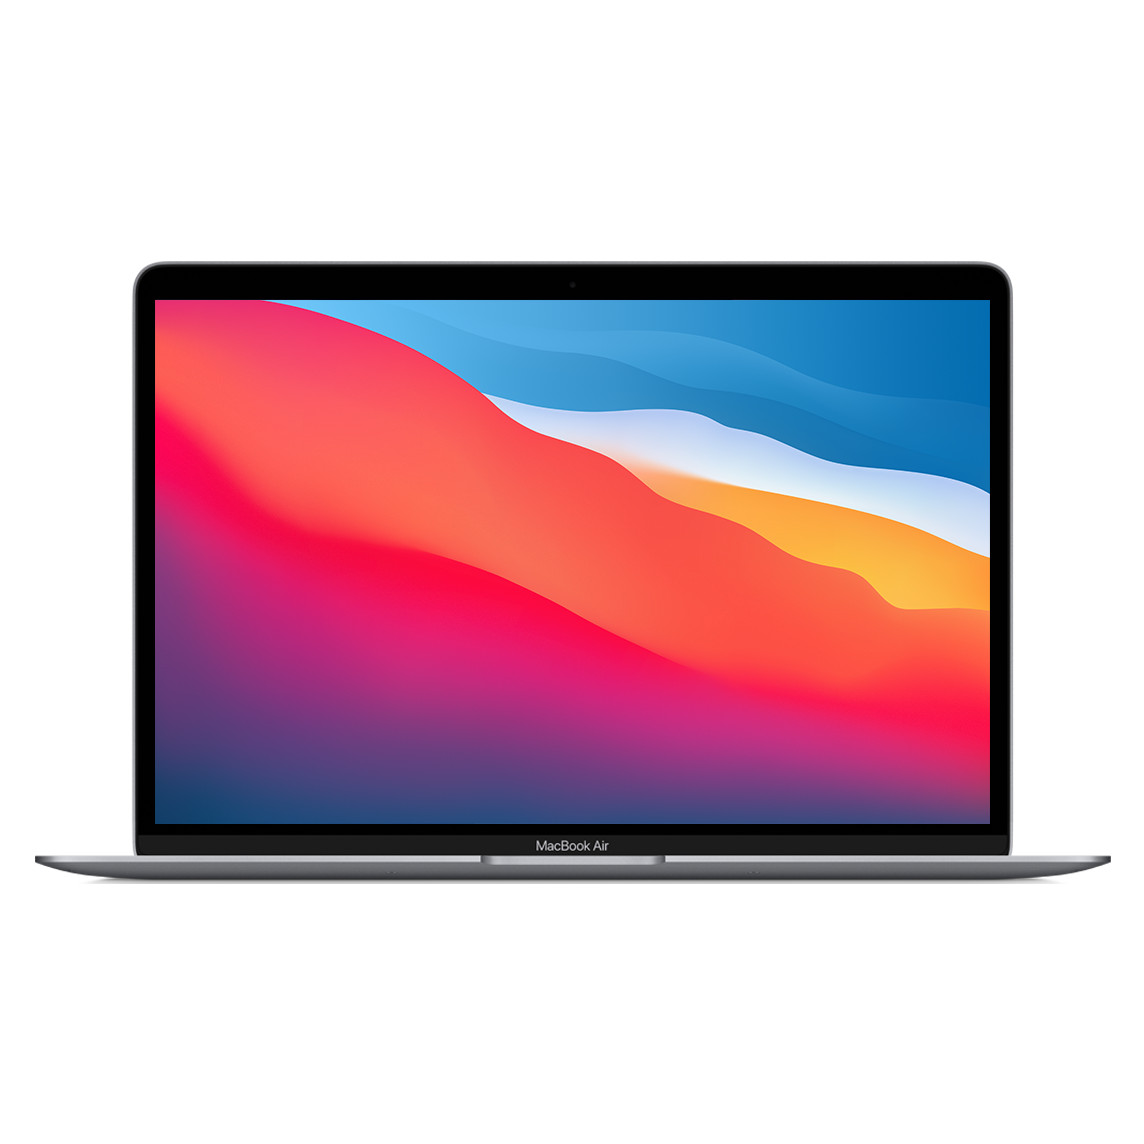 13.3-inch MacBook Air, Grey, open, thin bezel, FaceTime HD camera, curved edges